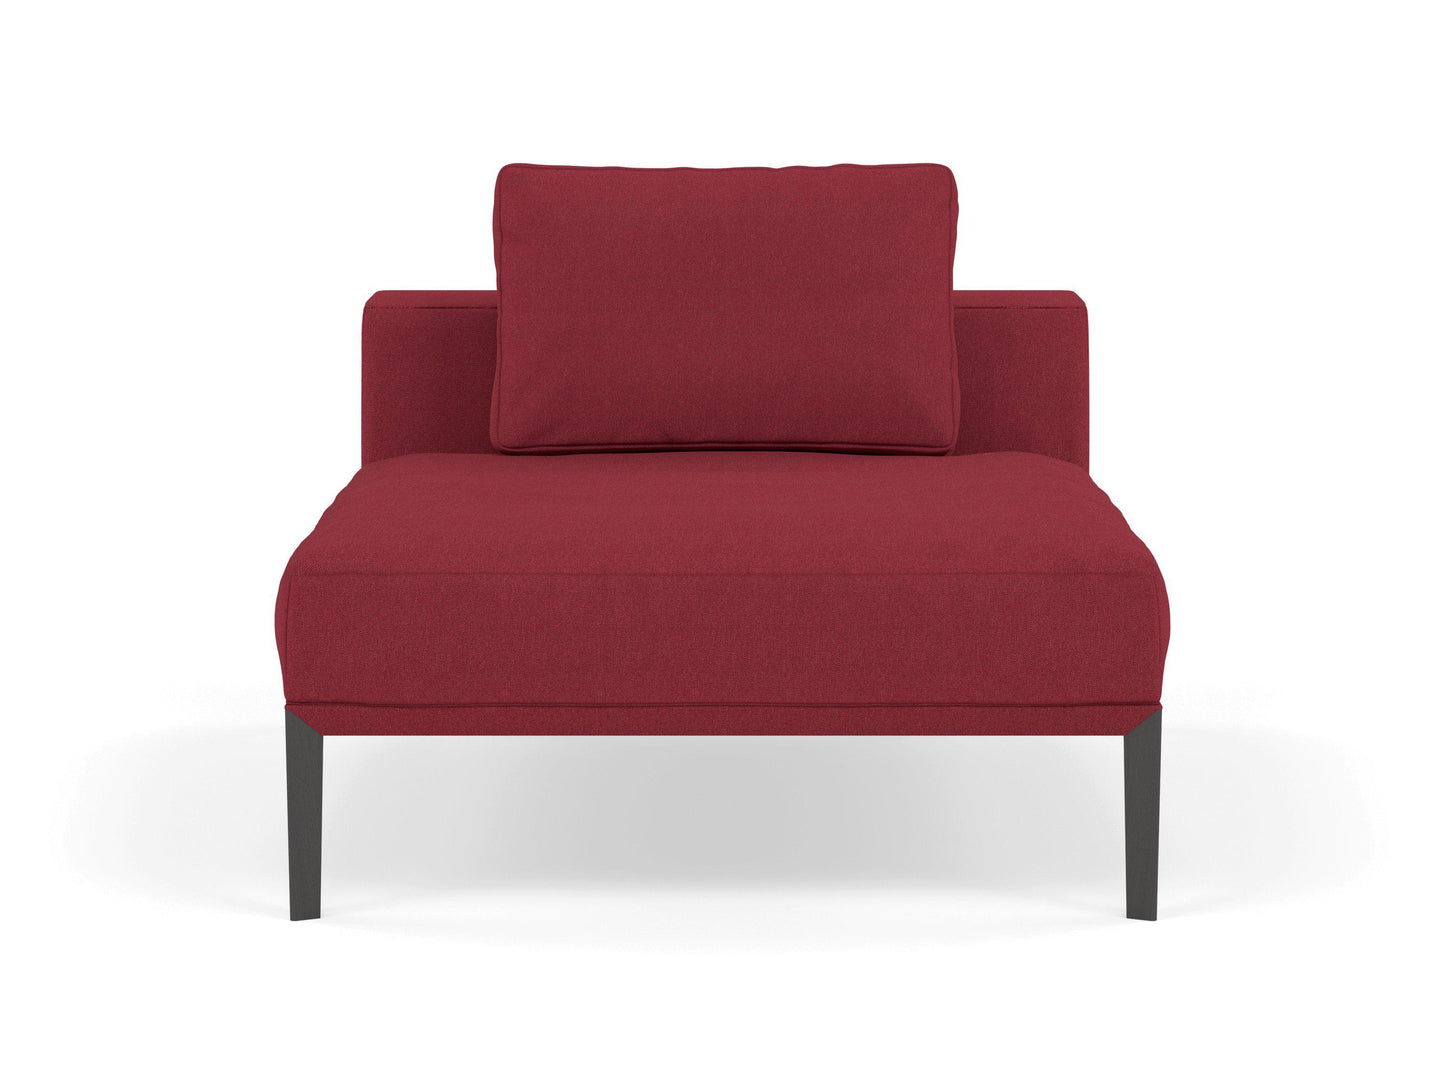 Modern Armchair 1 Seater Sofa without armrests in Rasberry Red FAbric-Wenge Oak-Distinct Designs (London) Ltd